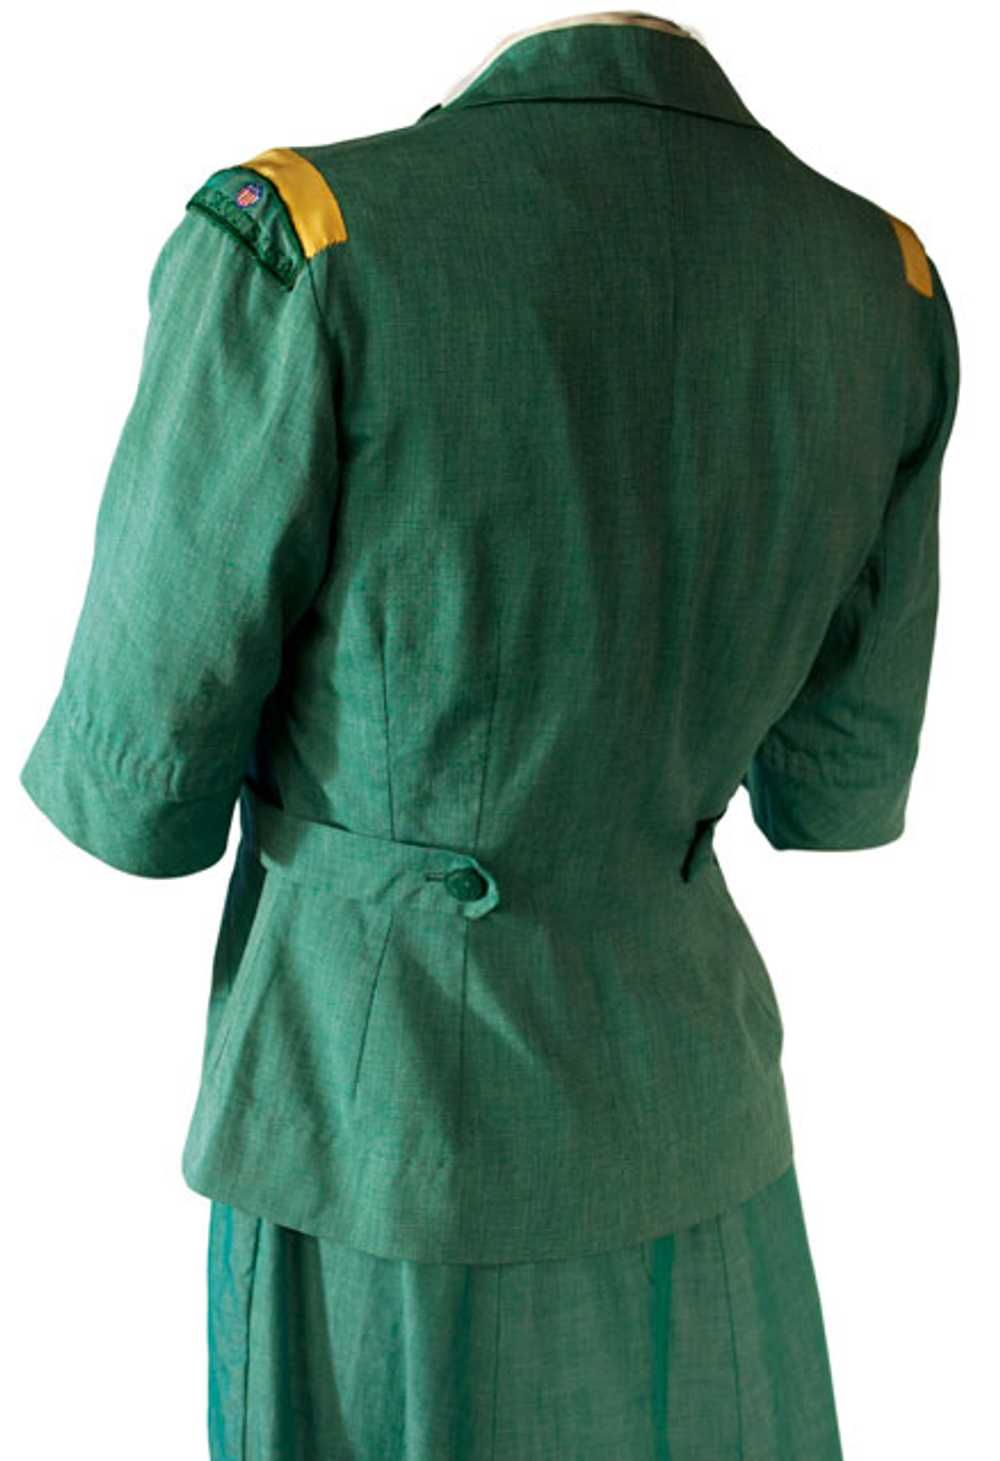 1950s Girl Scout Uniform Dress and Jacket - image 2